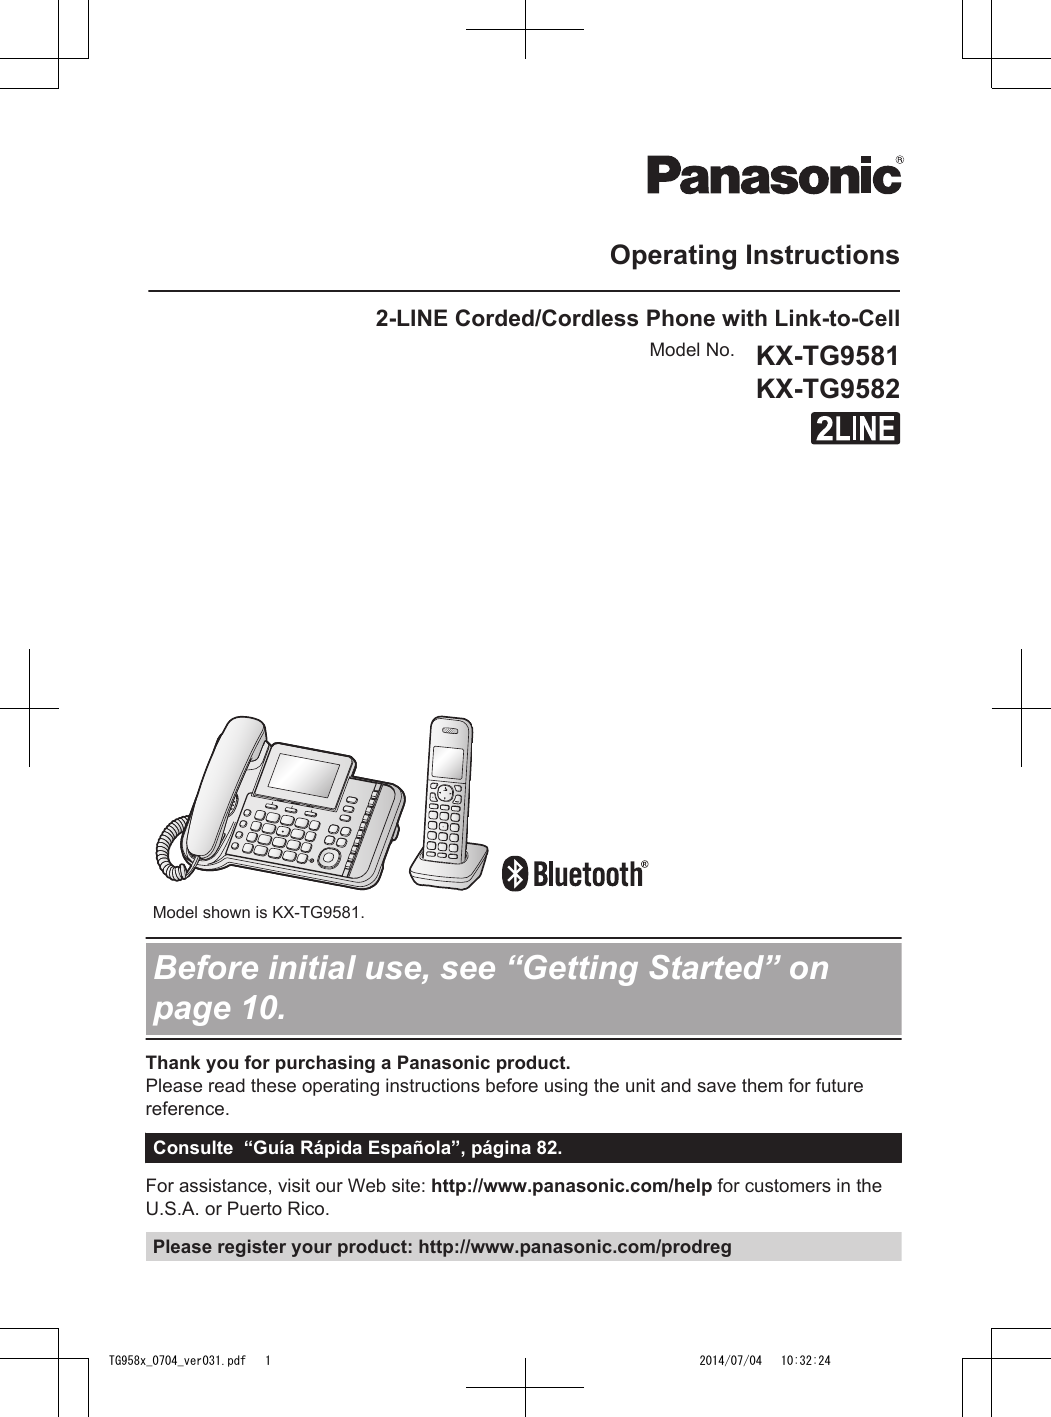 Operating Instructions2-LINE Corded/Cordless Phone with Link-to-CellModel No. KX-TG9581KX-TG9582          Model shown is KX-TG9581.Before initial use, see “Getting Started” onpage 10.Thank you for purchasing a Panasonic product.Please read these operating instructions before using the unit and save them for futurereference.Consulte  “Guía Rápida Española”, página 82.For assistance, visit our Web site: http://www.panasonic.com/help for customers in theU.S.A. or Puerto Rico.Please register your product: http://www.panasonic.com/prodregTG958x_0704_ver031.pdf   1 2014/07/04   10:32:24